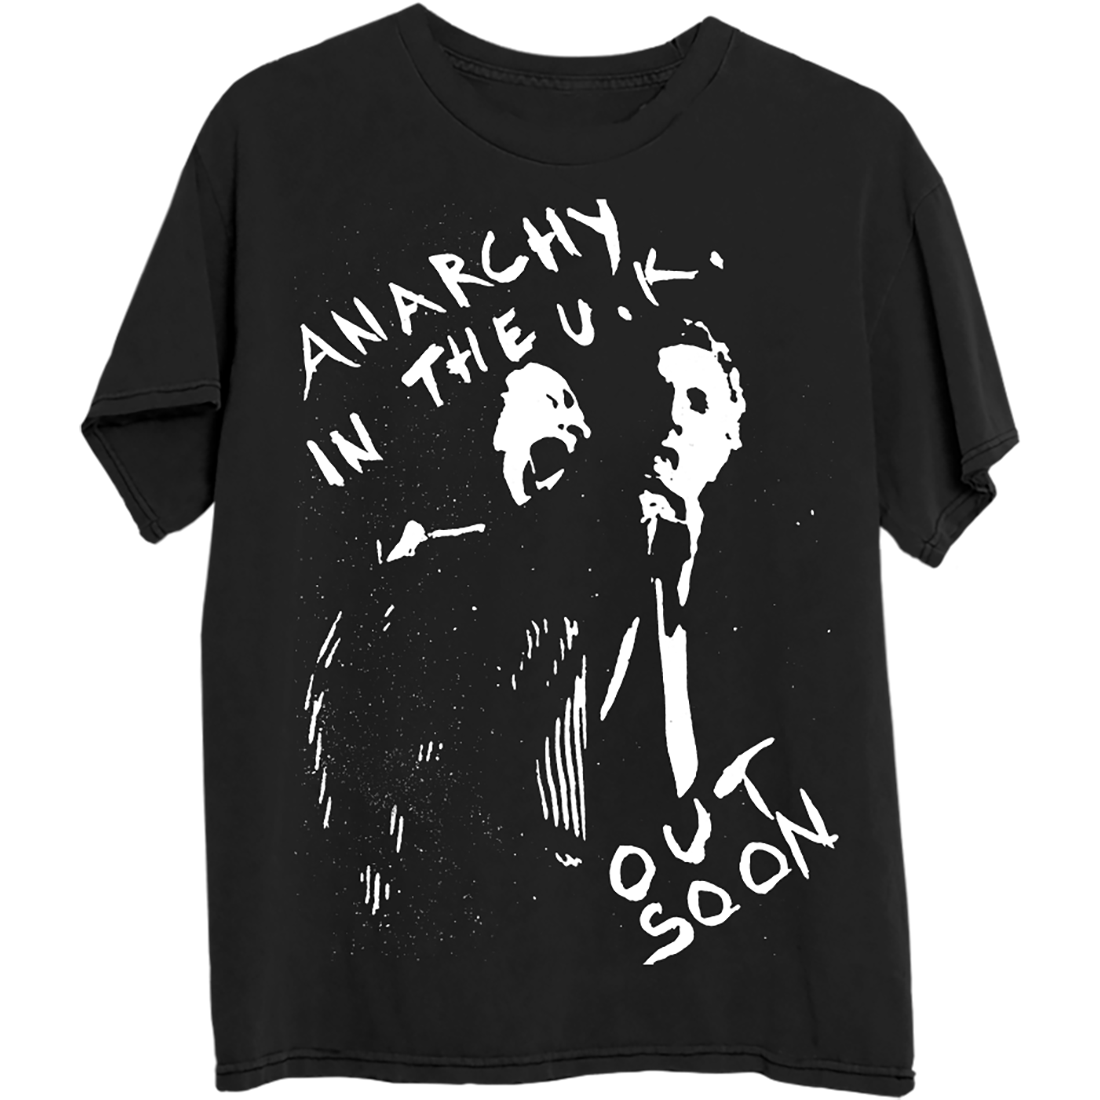 Sex Pistols - Anarchy in the UK Out Soon Black T-Shirt